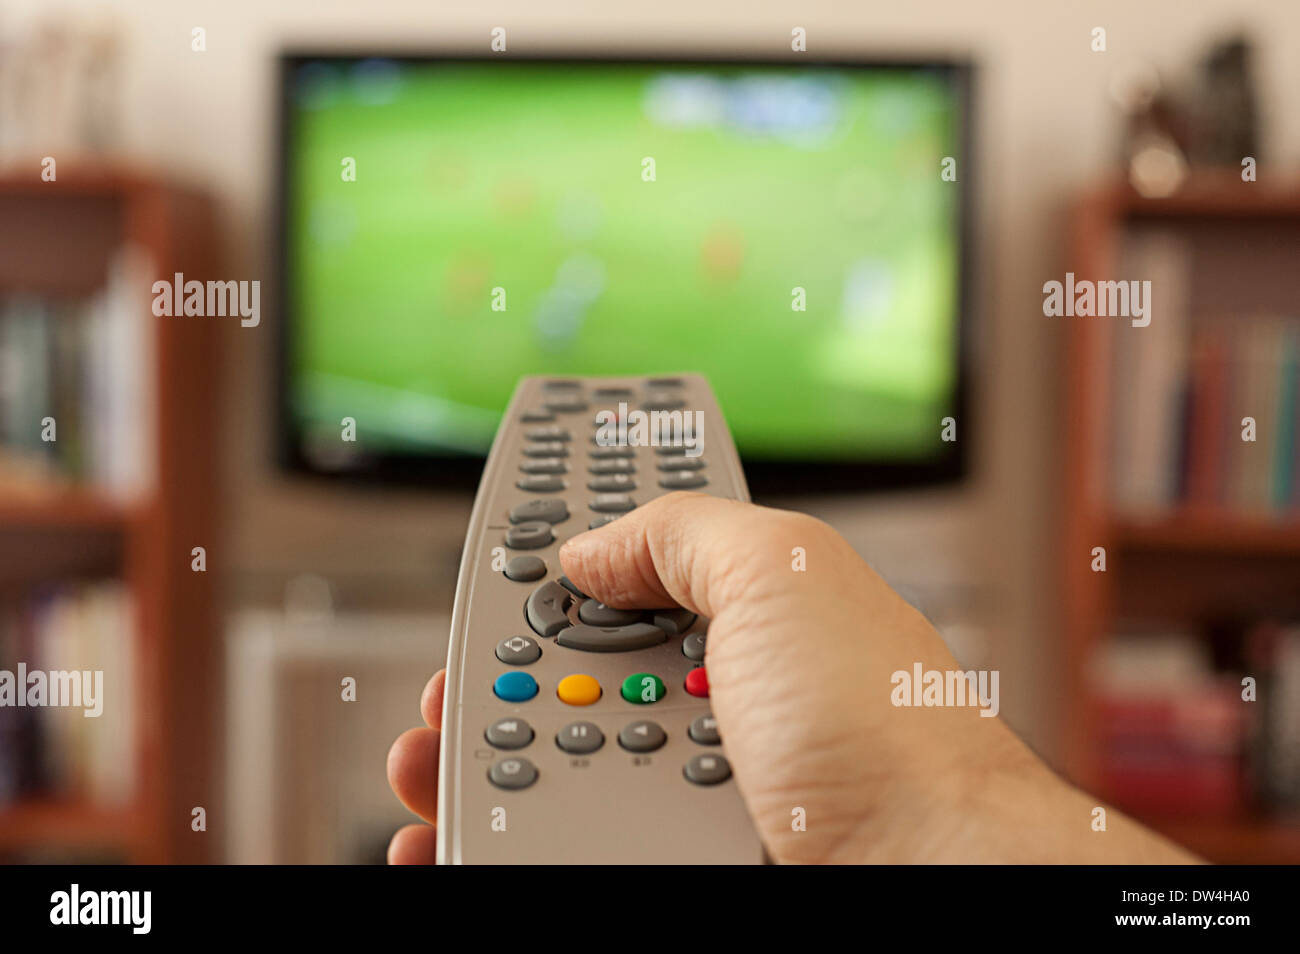 hand holding a remote control in front of television screen Stock Photo